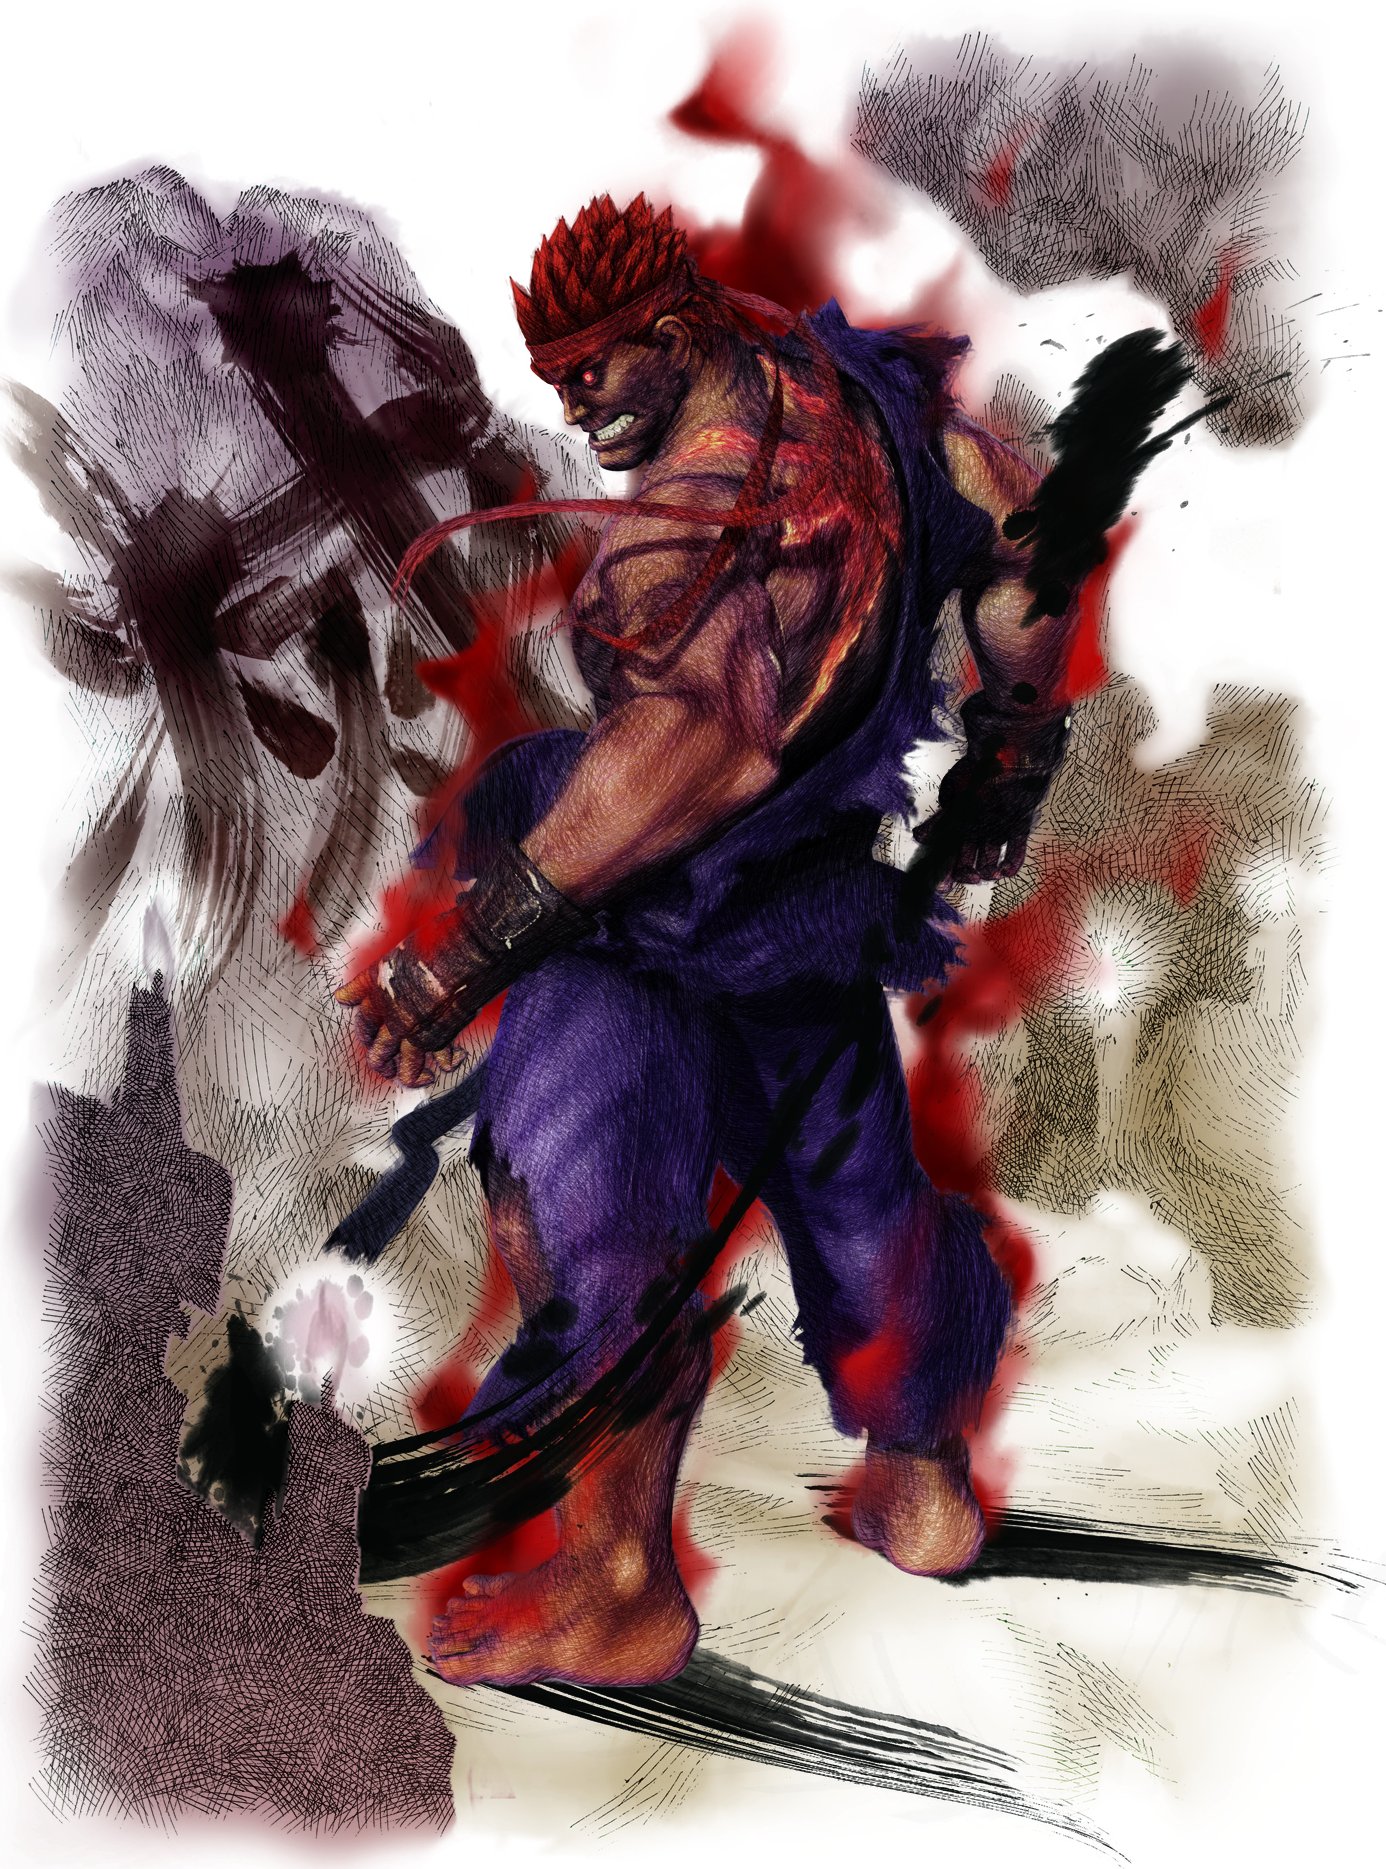 Our Street Fighter 30th Tribute: Evil Ryu in Ultra Street Fighter